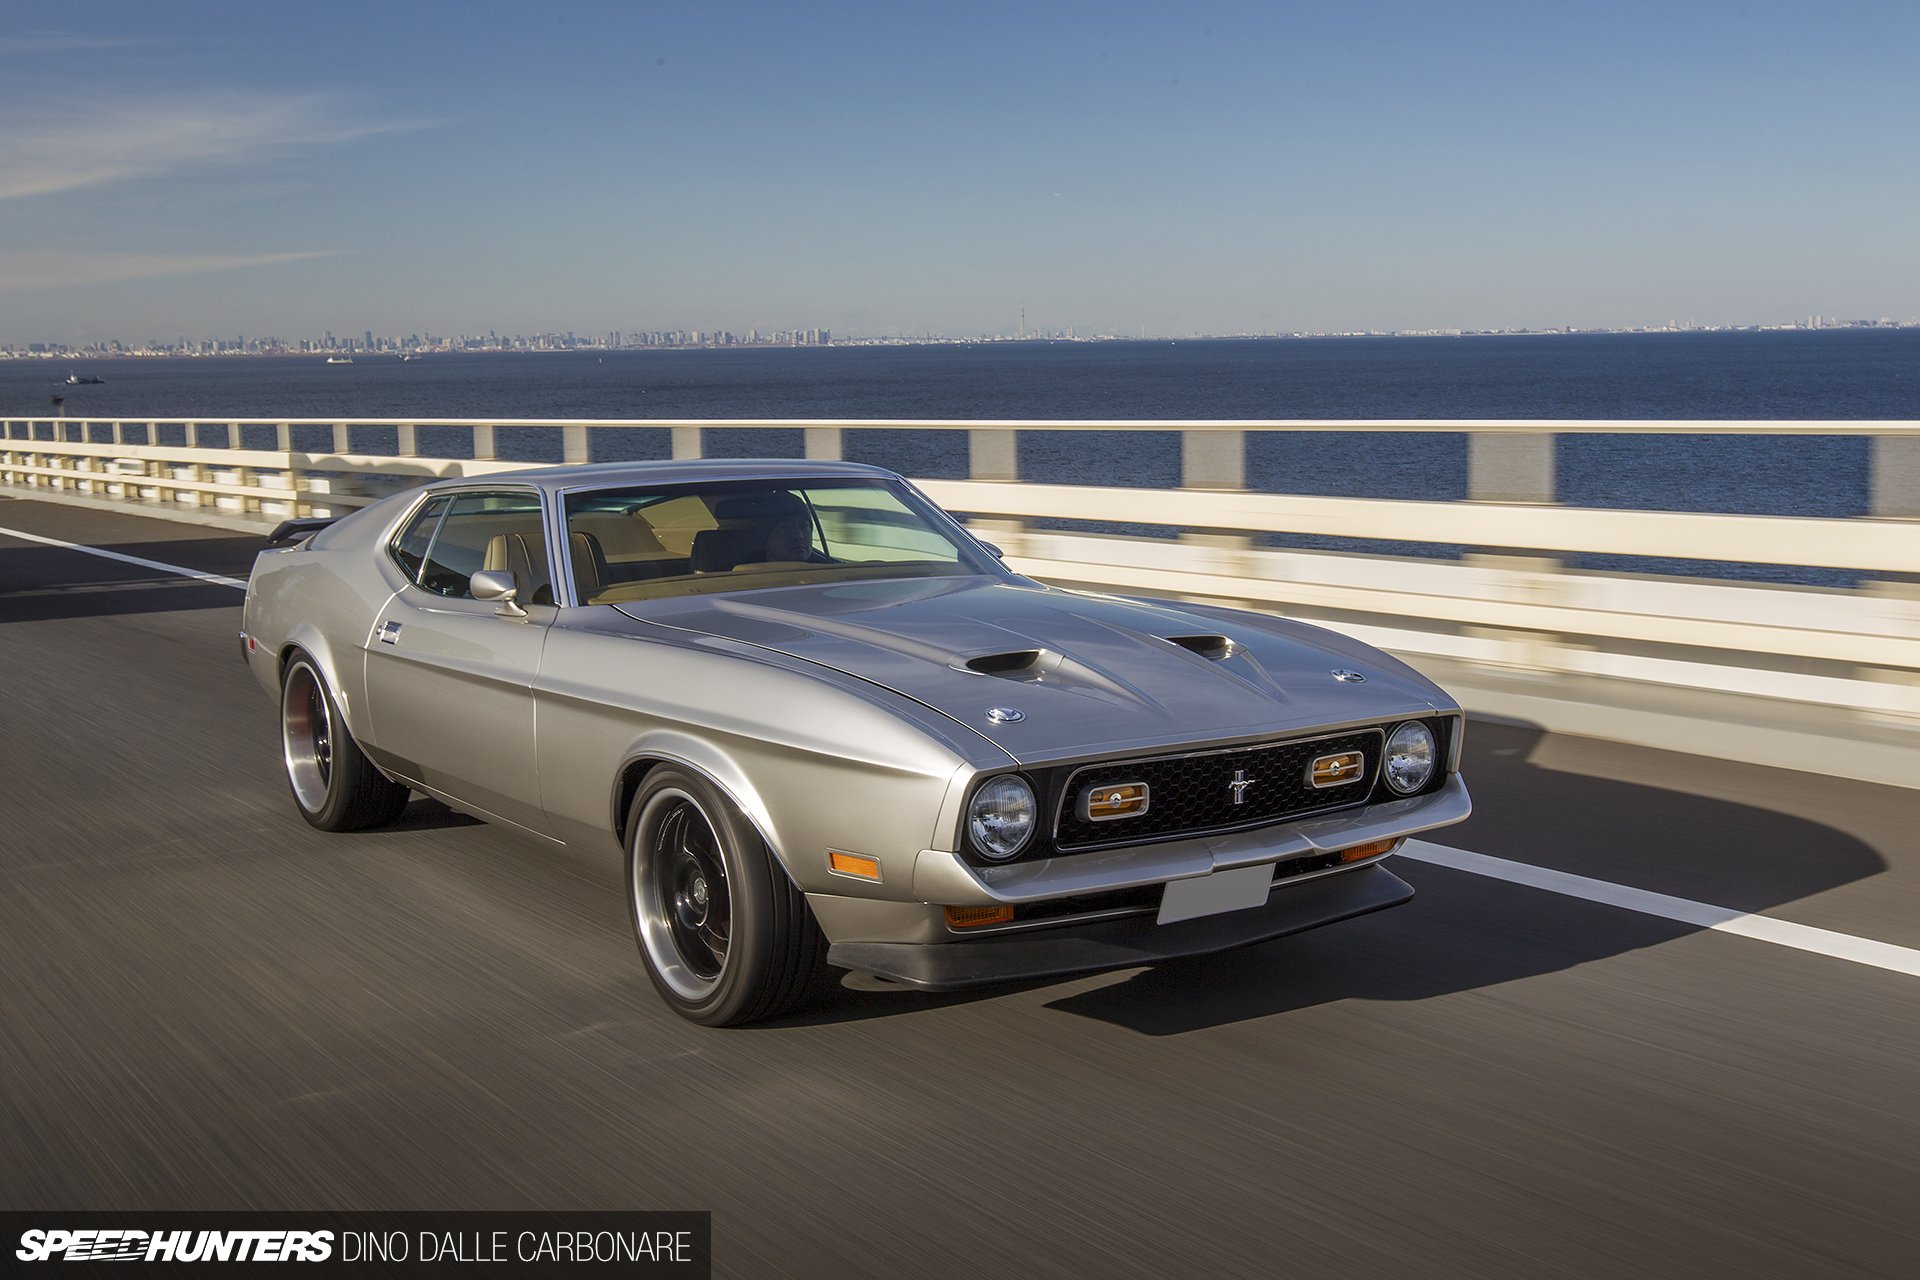 1966 Ford Mustang Mach 1 Wallpapers